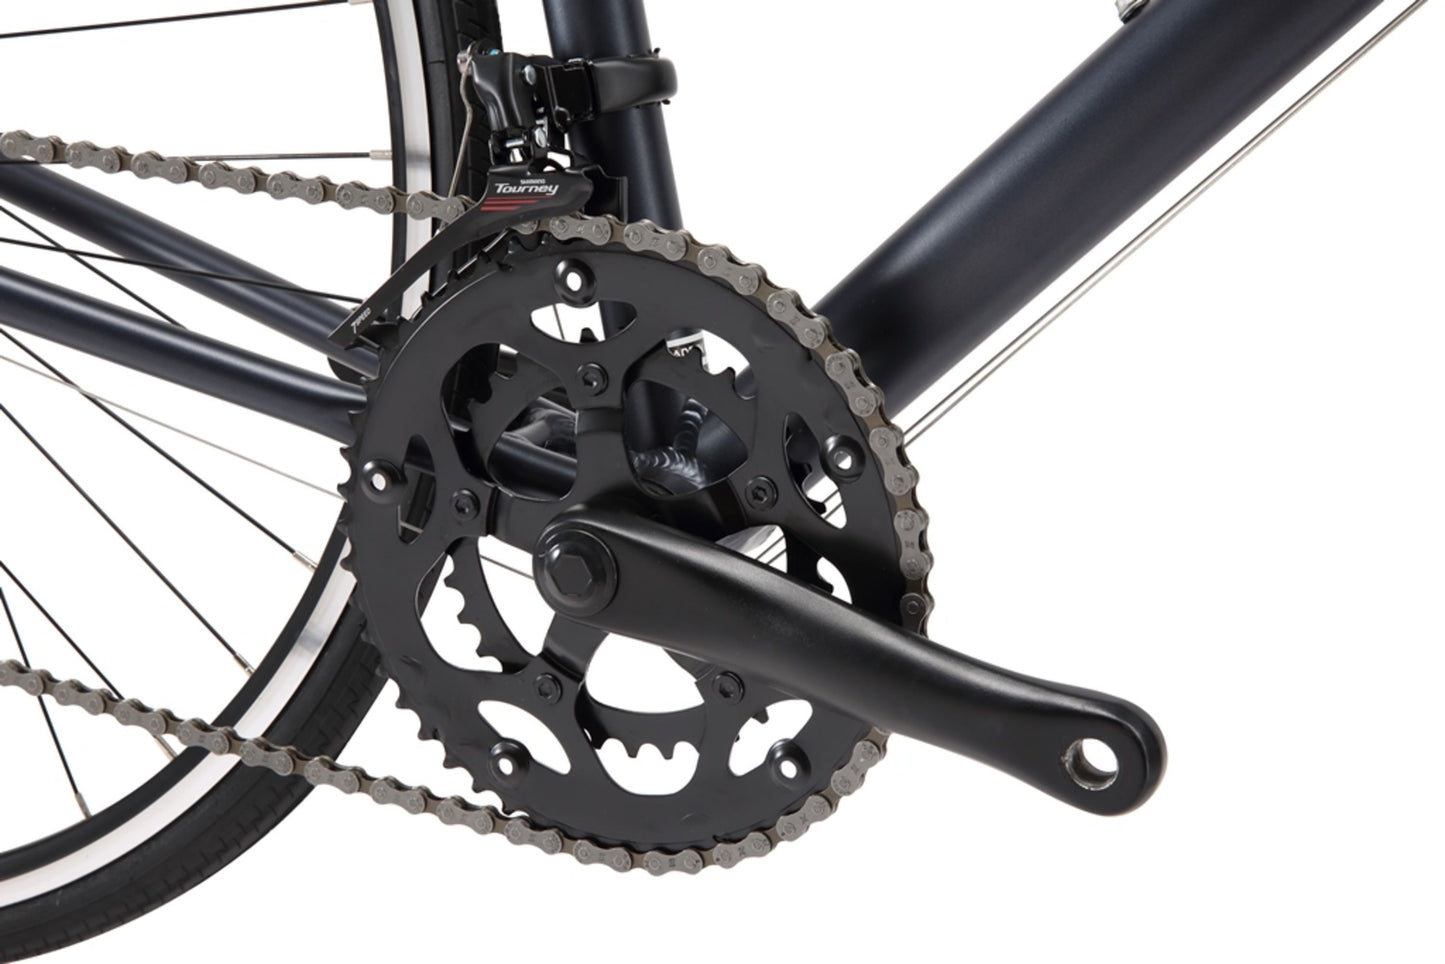 The Express Road in Gunmetal Grey showing drivetrain from Reid Cycles Australia